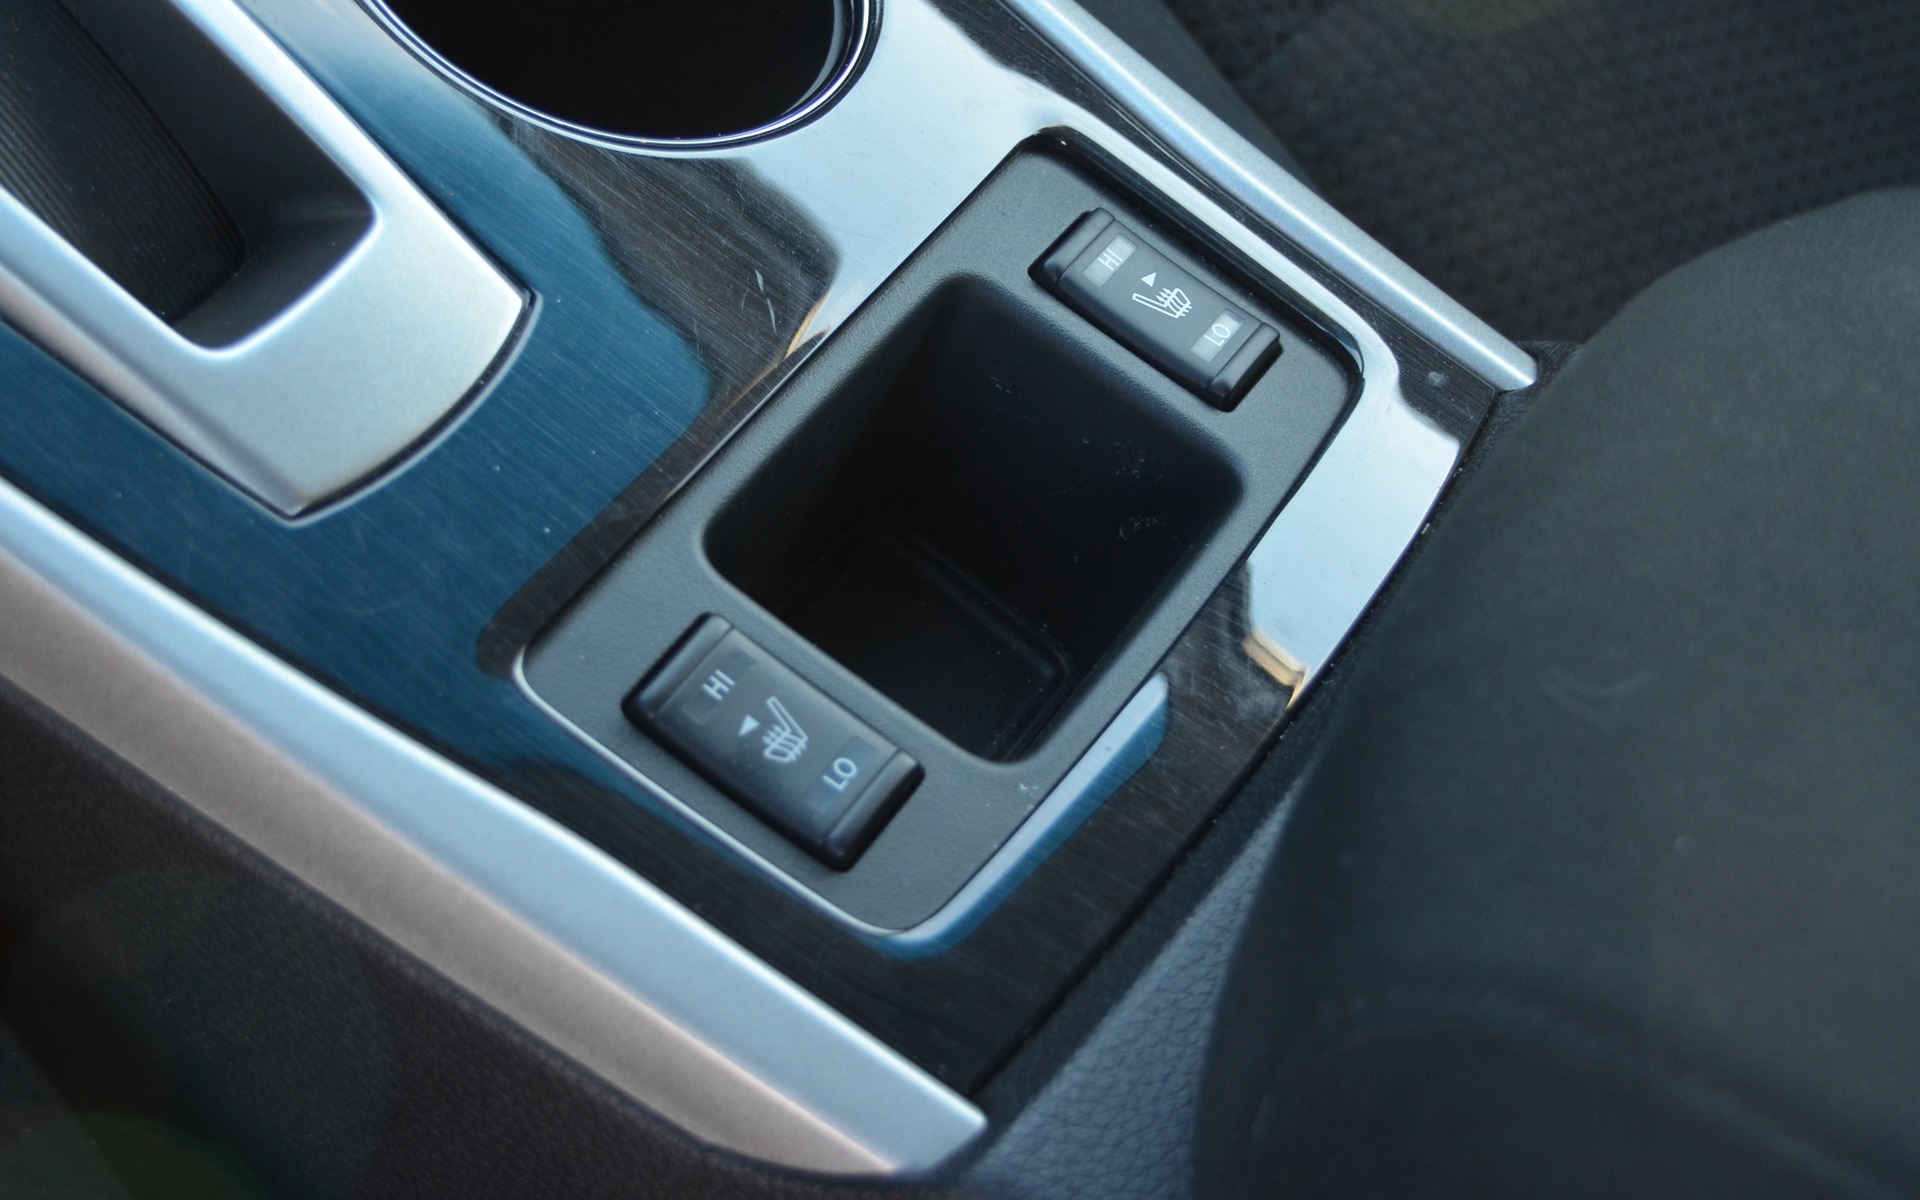 The heated seats were not needed in the southern U.S.